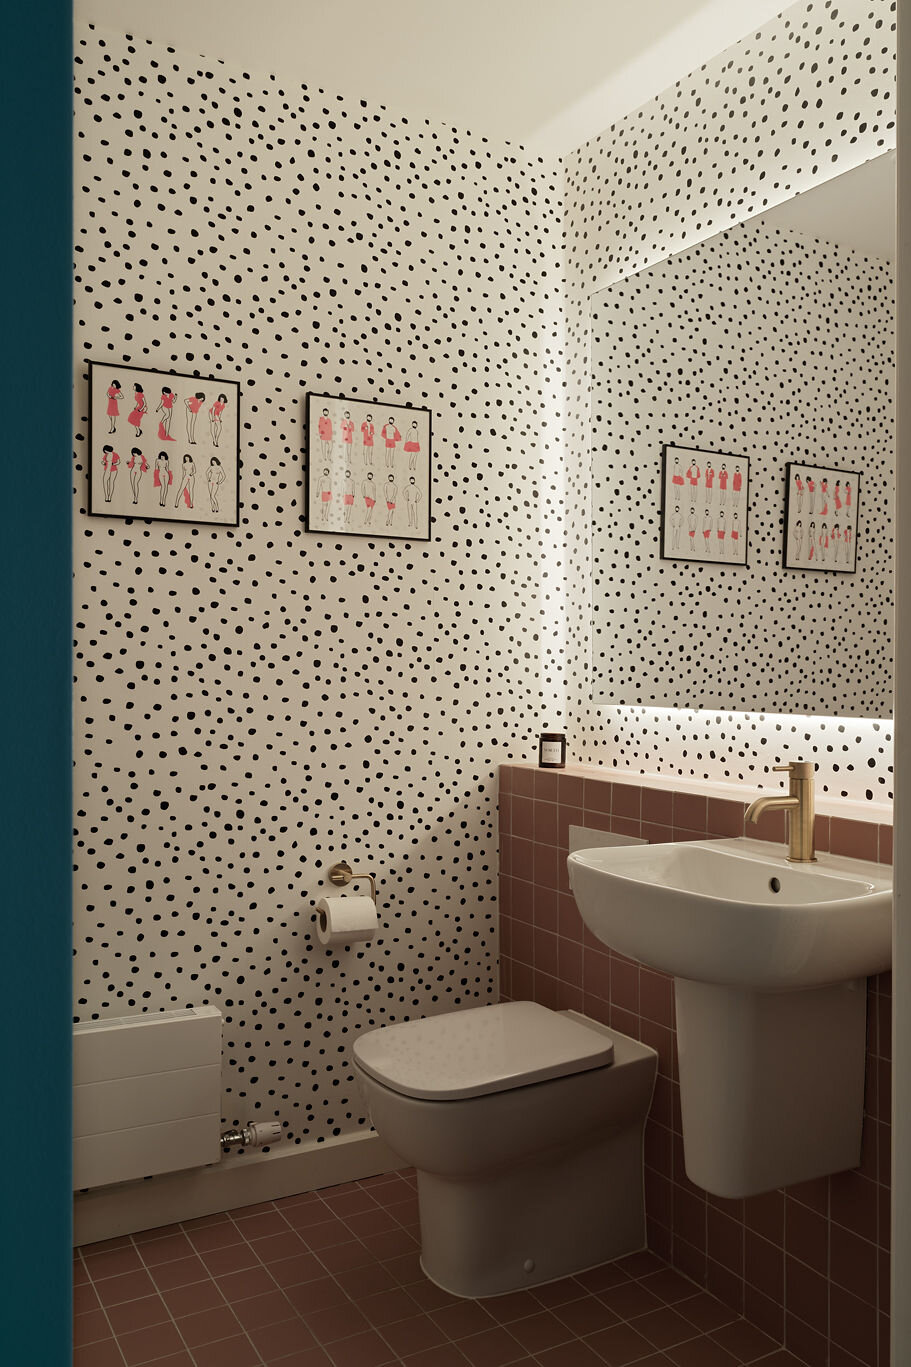 dotted bathroom wall, floating sick